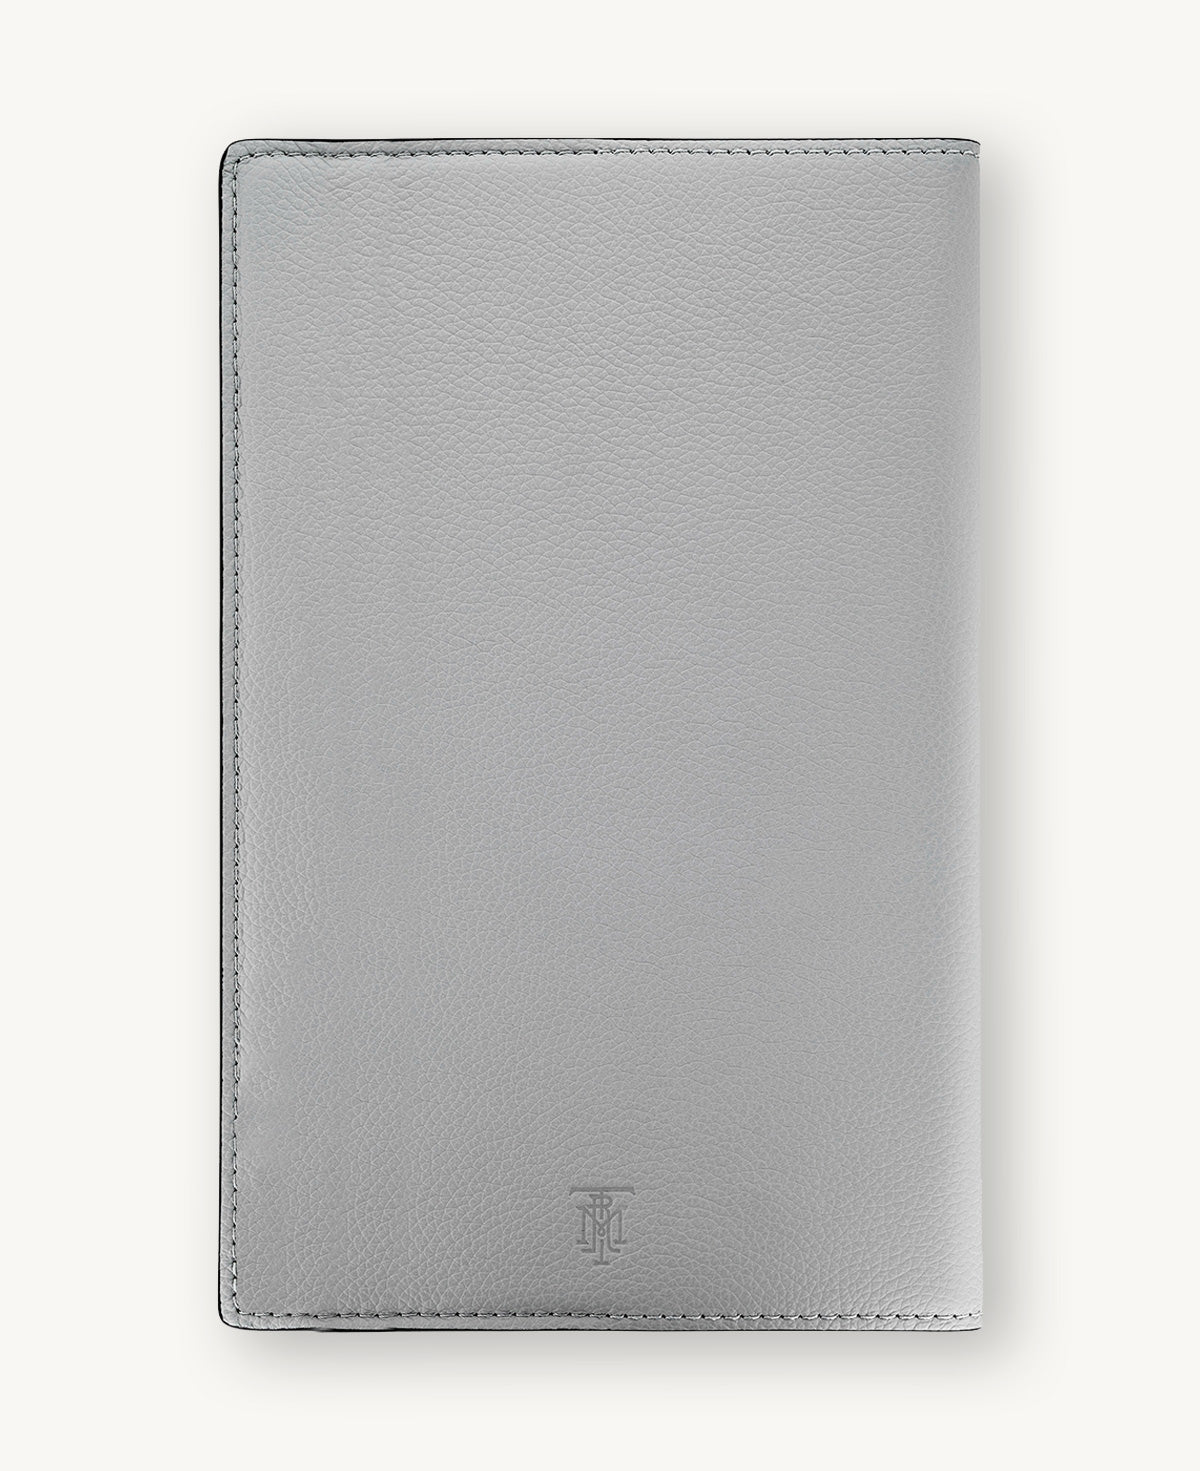 NOTEBOOK LARGE GREY